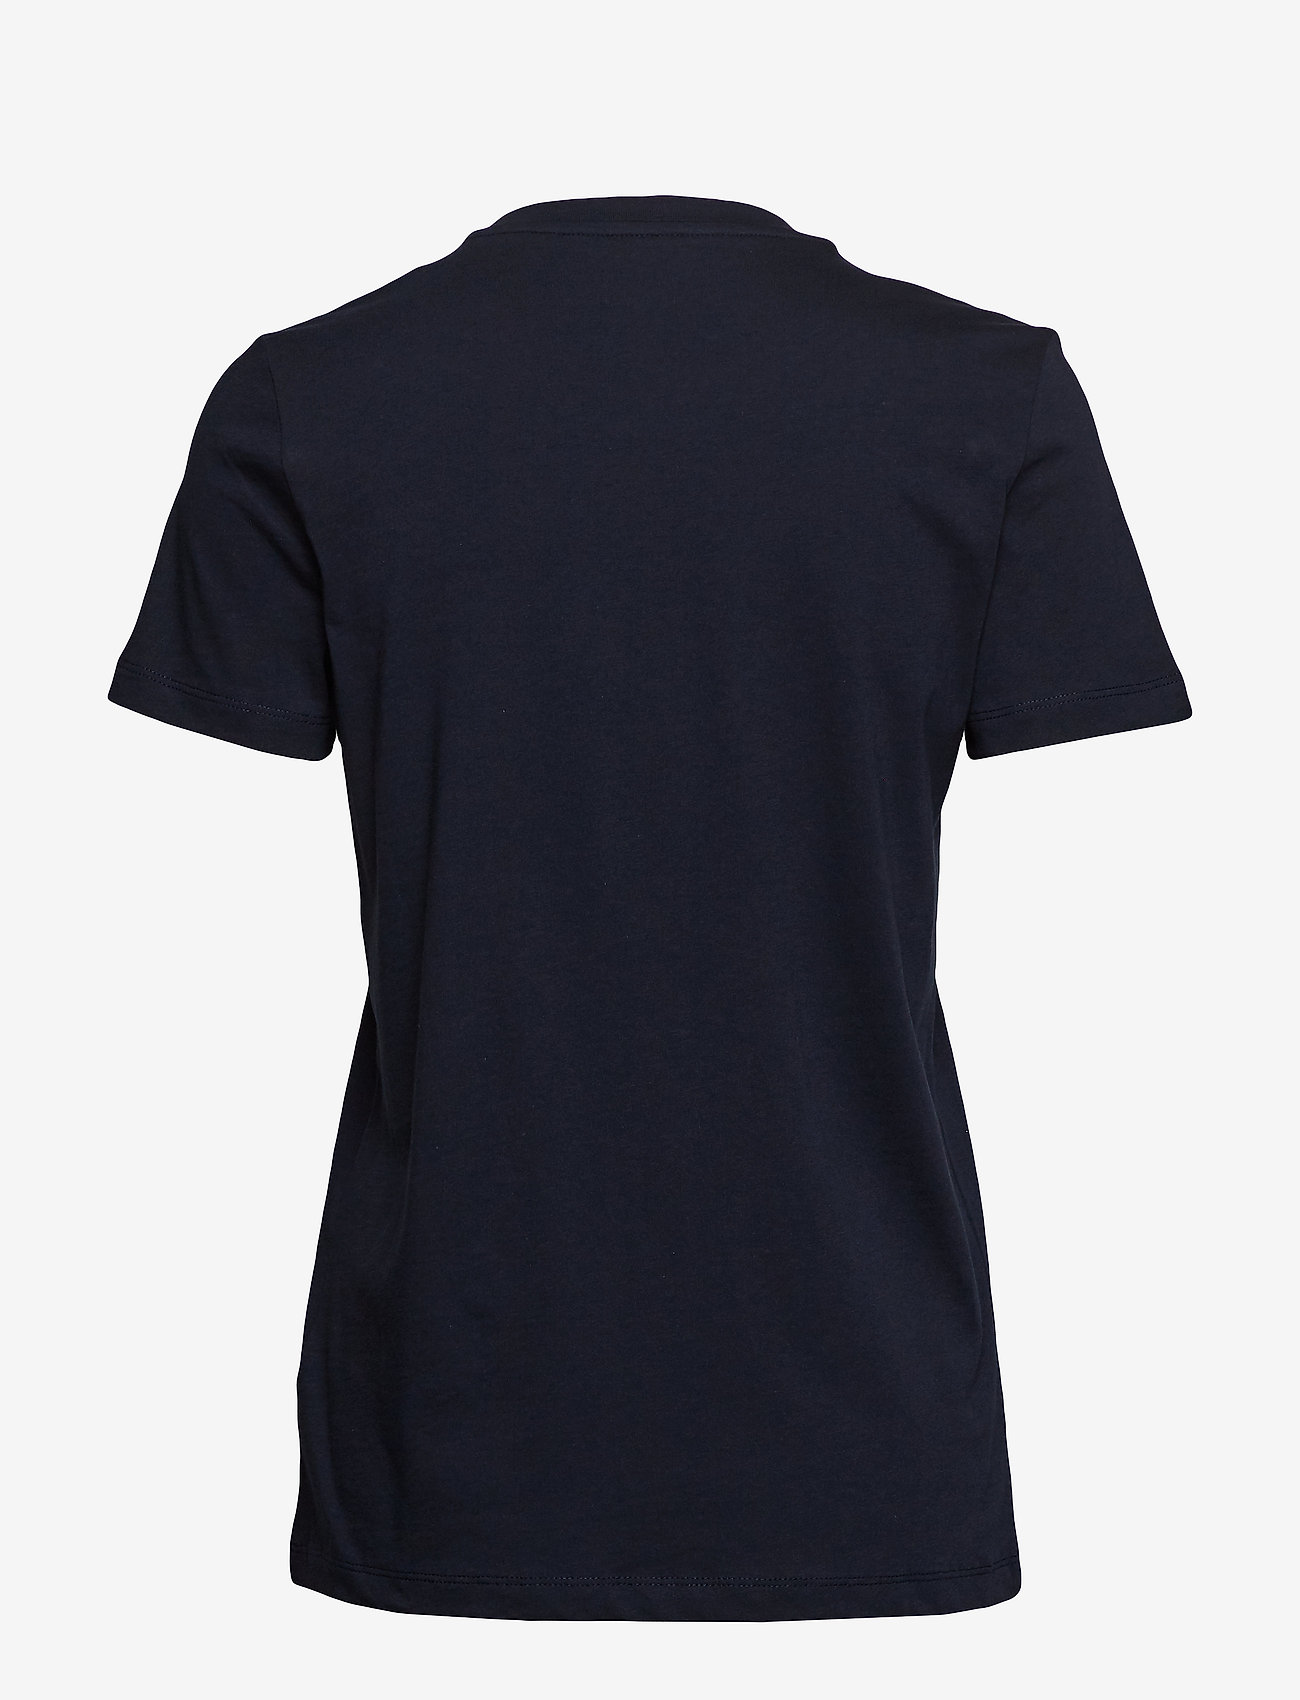 Tommy Hilfiger - HERITAGE CREW NECK GRAPHIC TEE - t-shirts & tops - midnight - 1